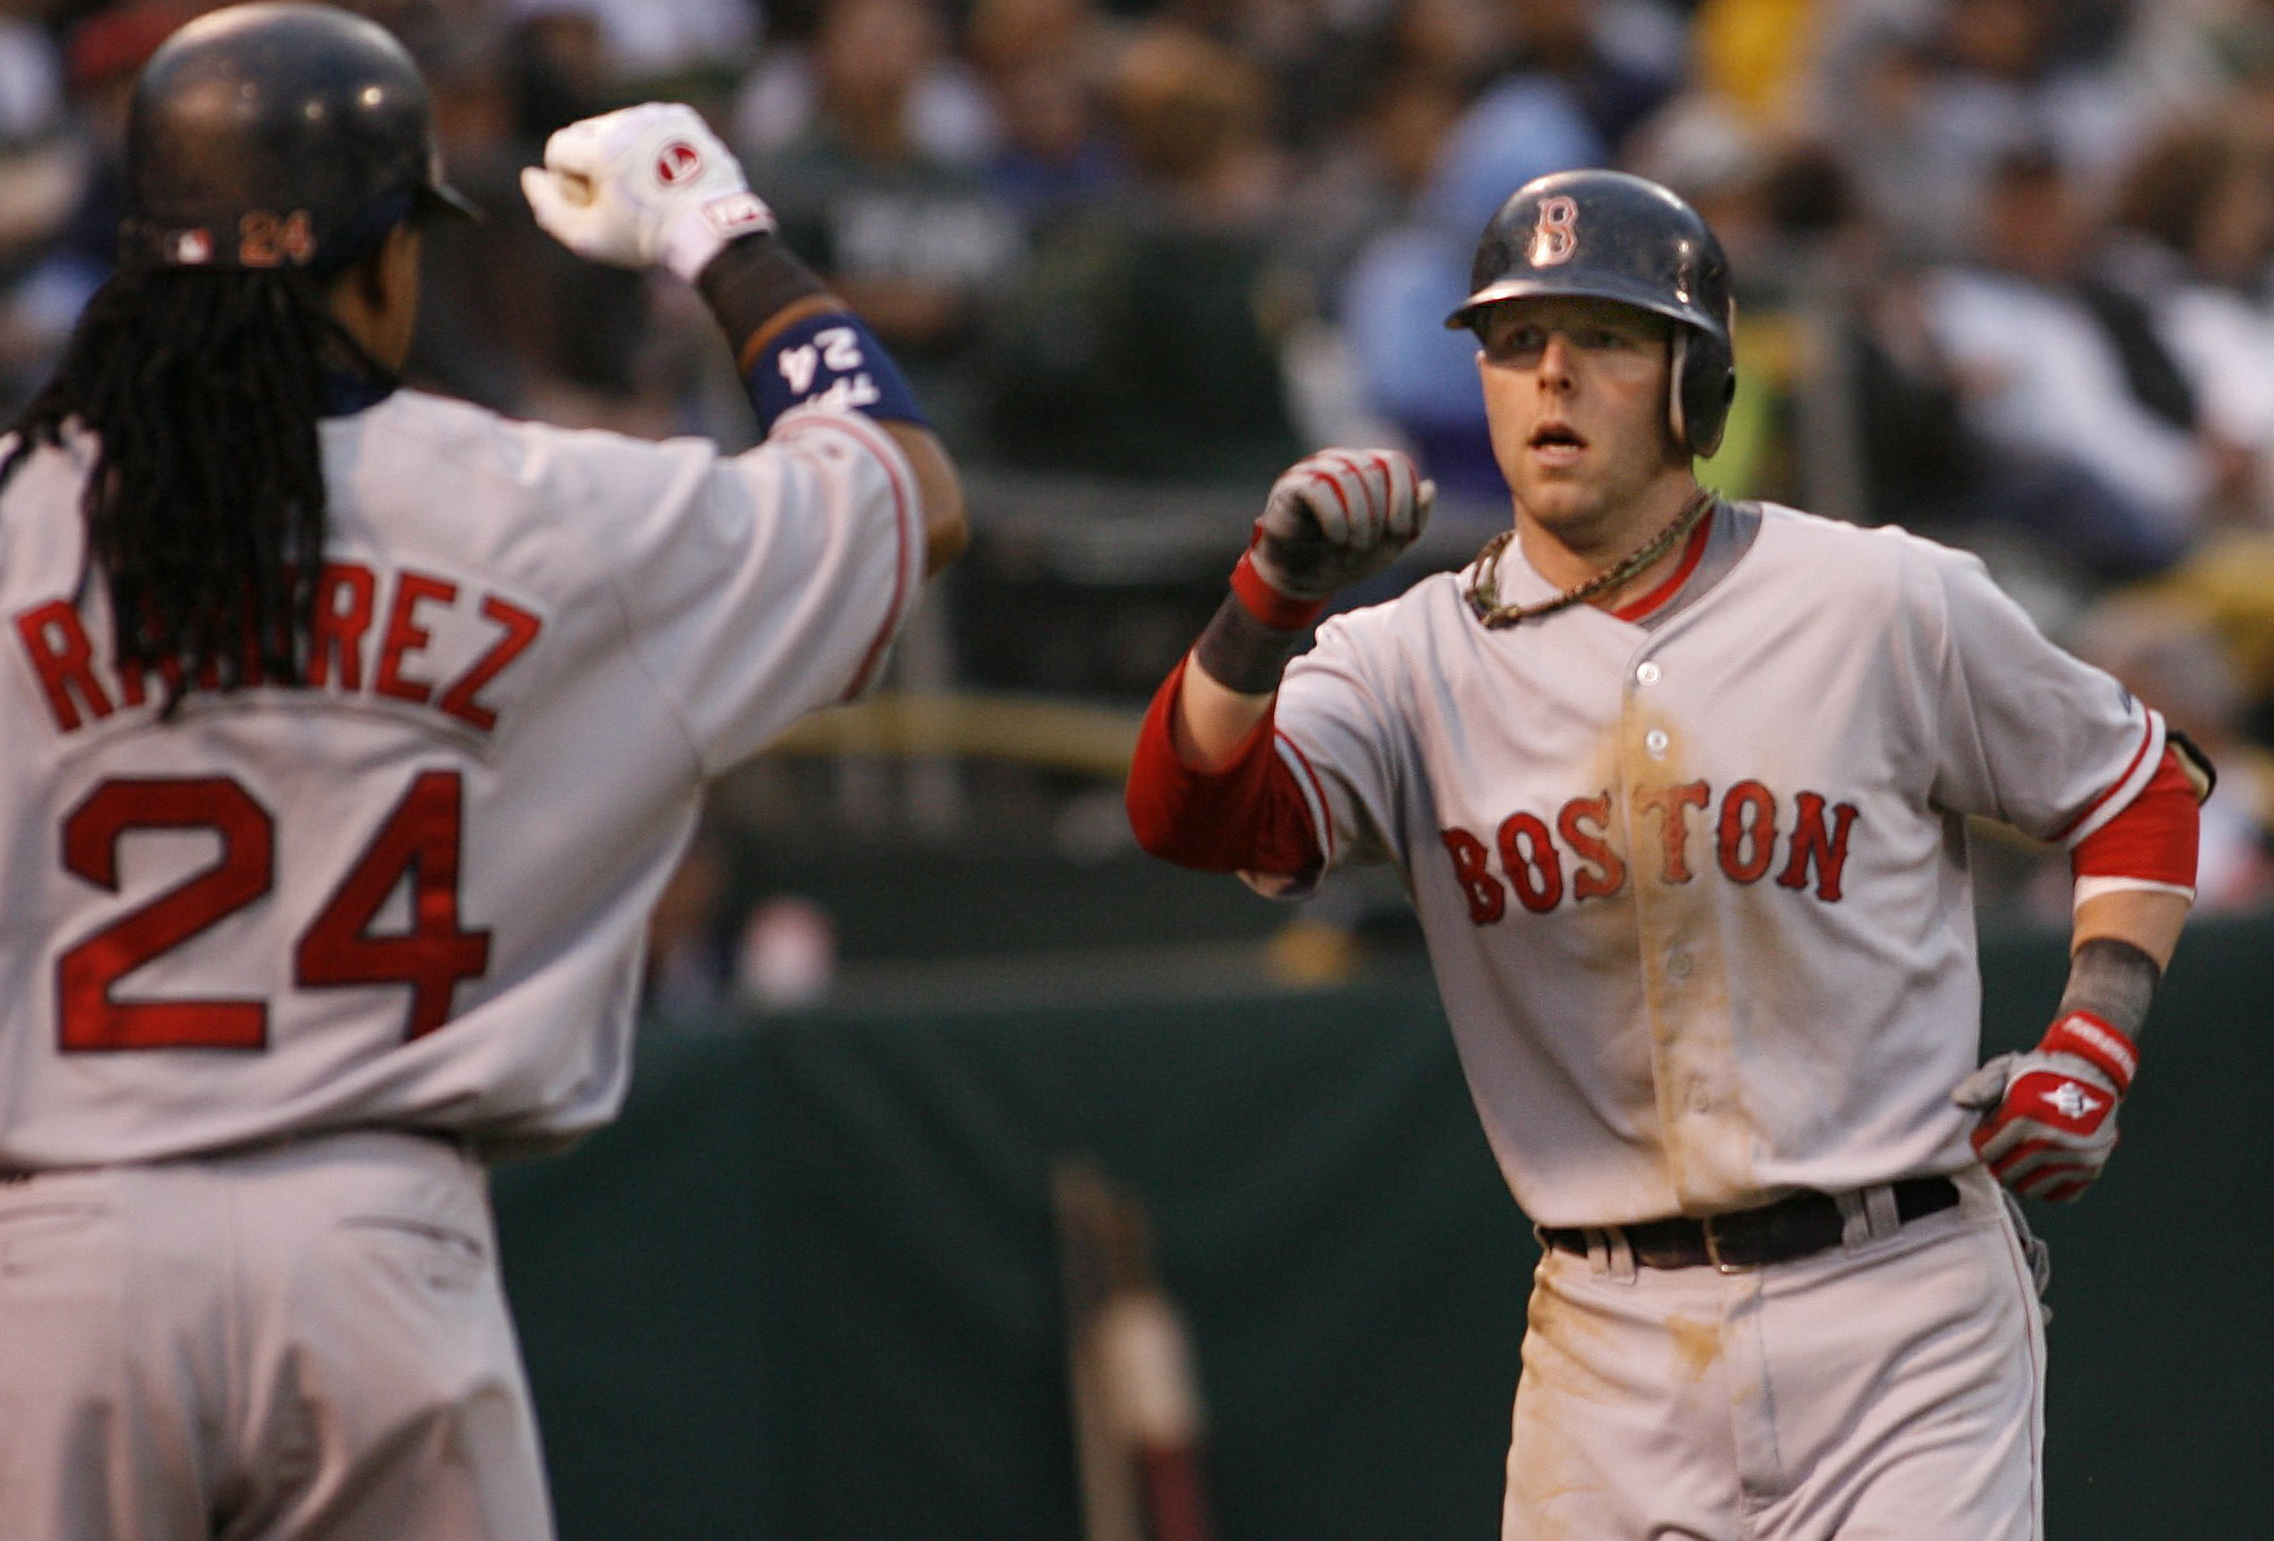 Dustin Pedroia player to watch for Red Sox